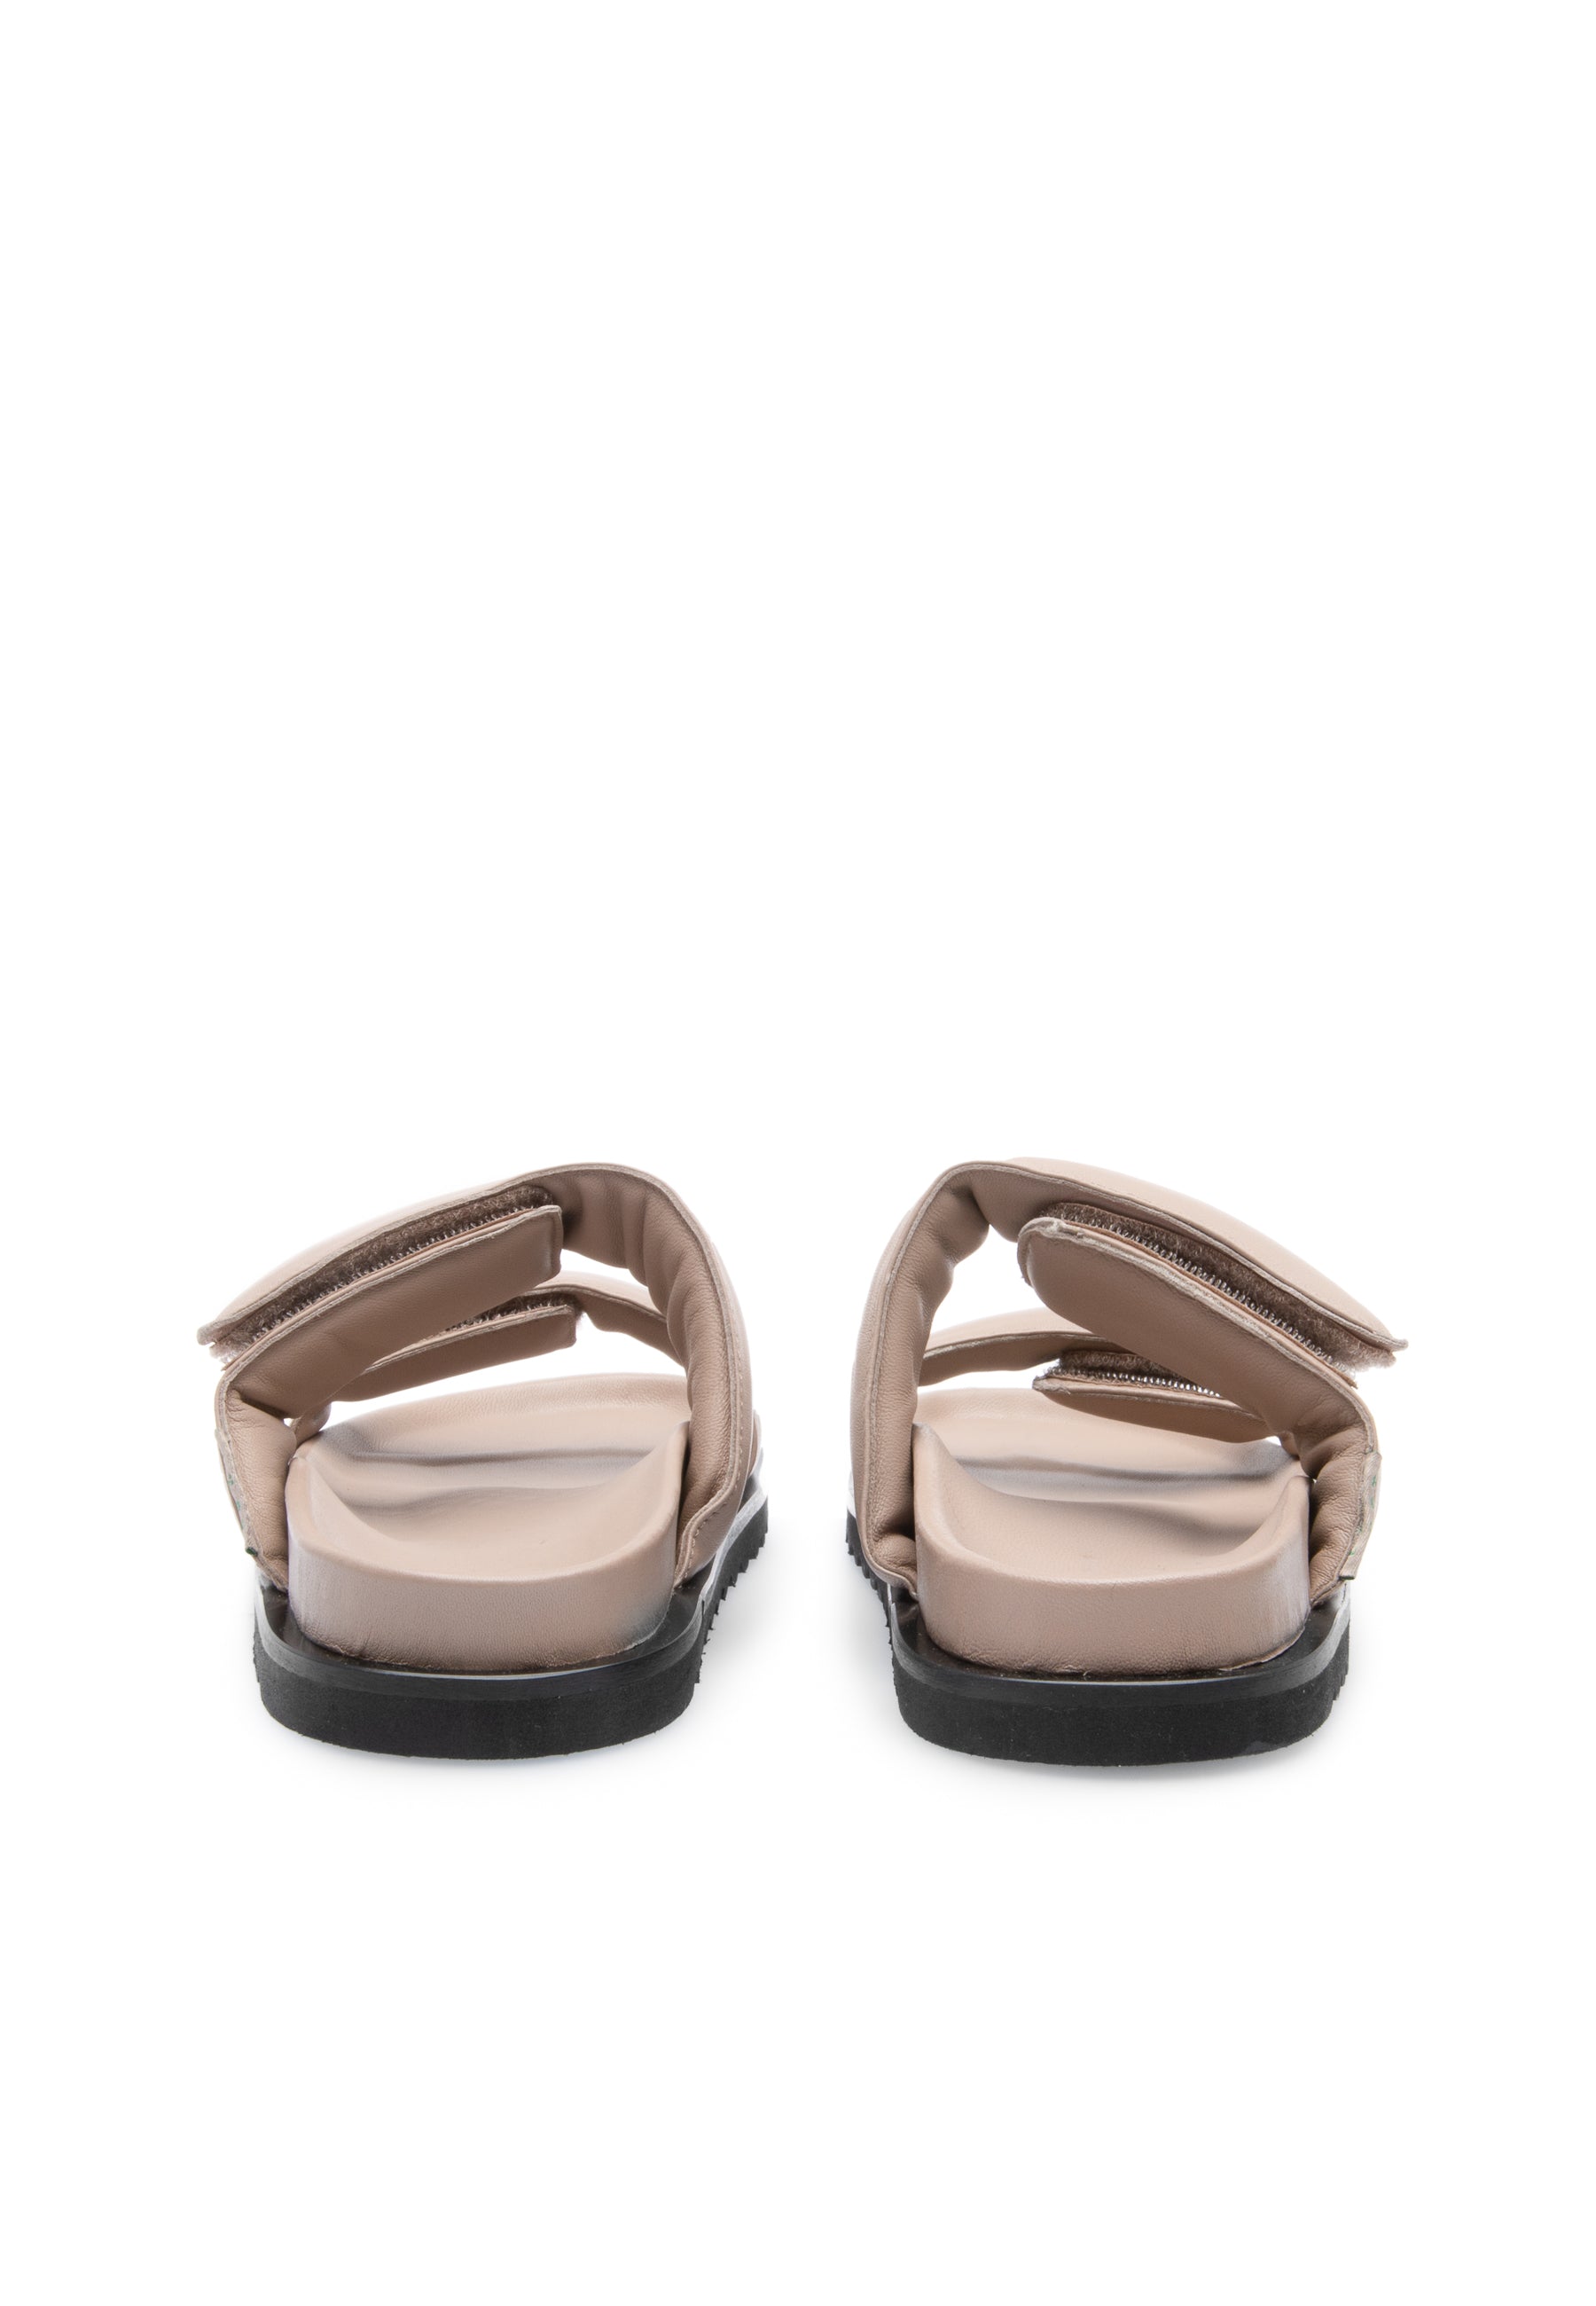 Corine Taupe Leather Puffy Sandals LAST1514 - 6